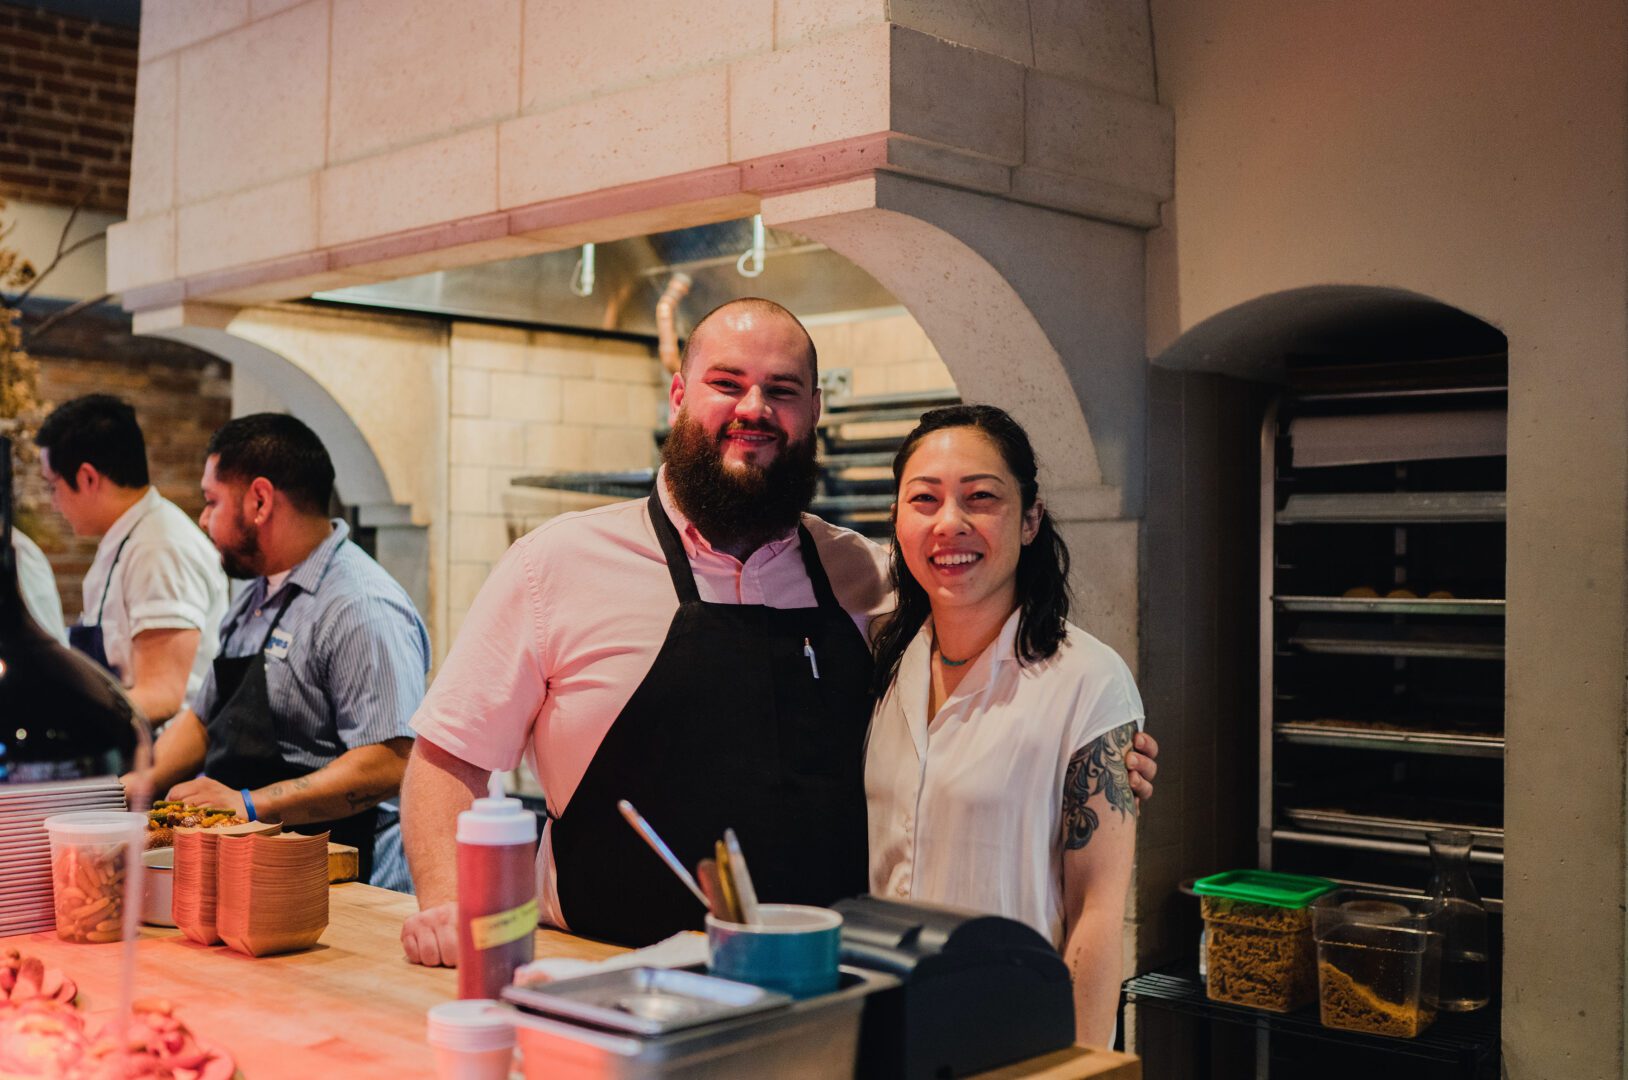 Agnes Restaurant and Cheesery owners, Vanessa Tilaka (left) and Thomas Kalb (right)